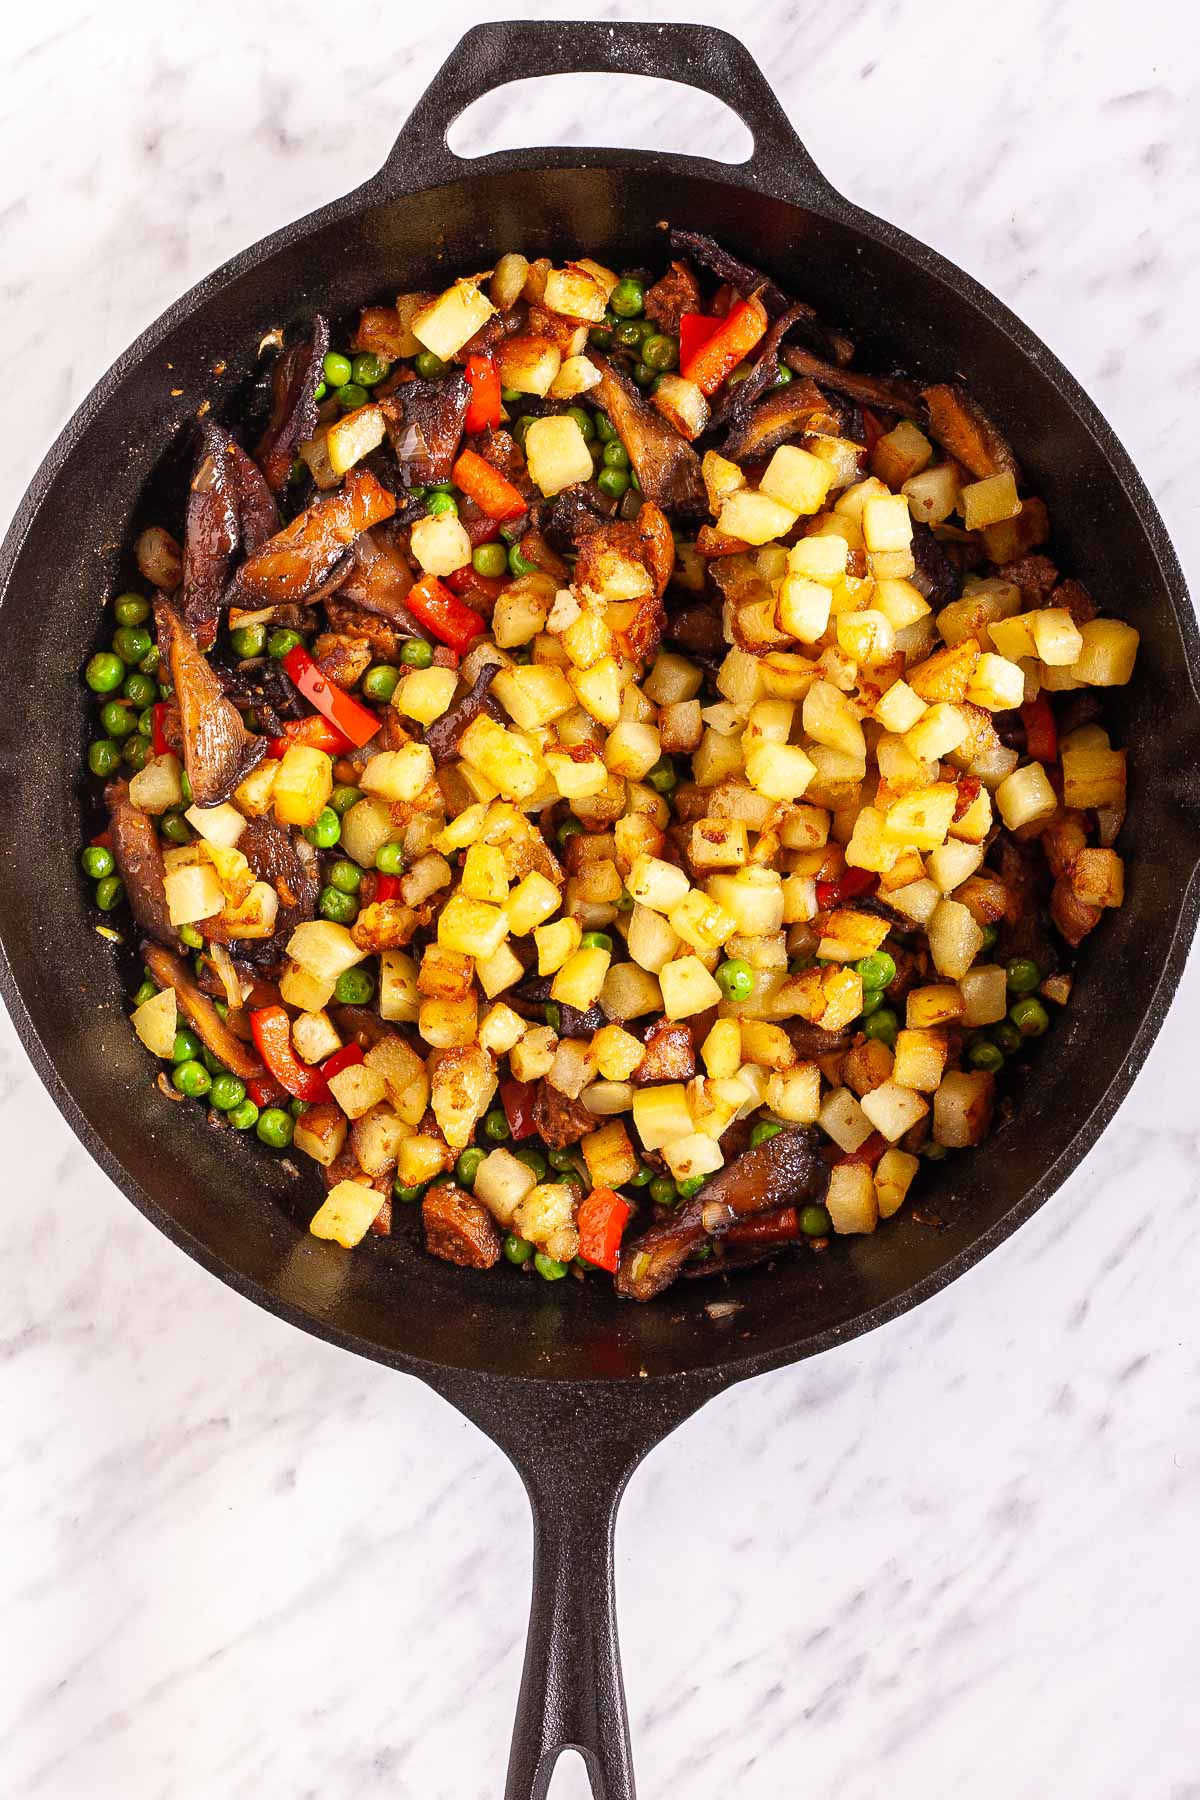 Black cast iron skillet with a mix of fried veggies like potatoes, green peas, chopped red pepper, chopped onion, crispy brown mushrooms and chopped vegan sausage.